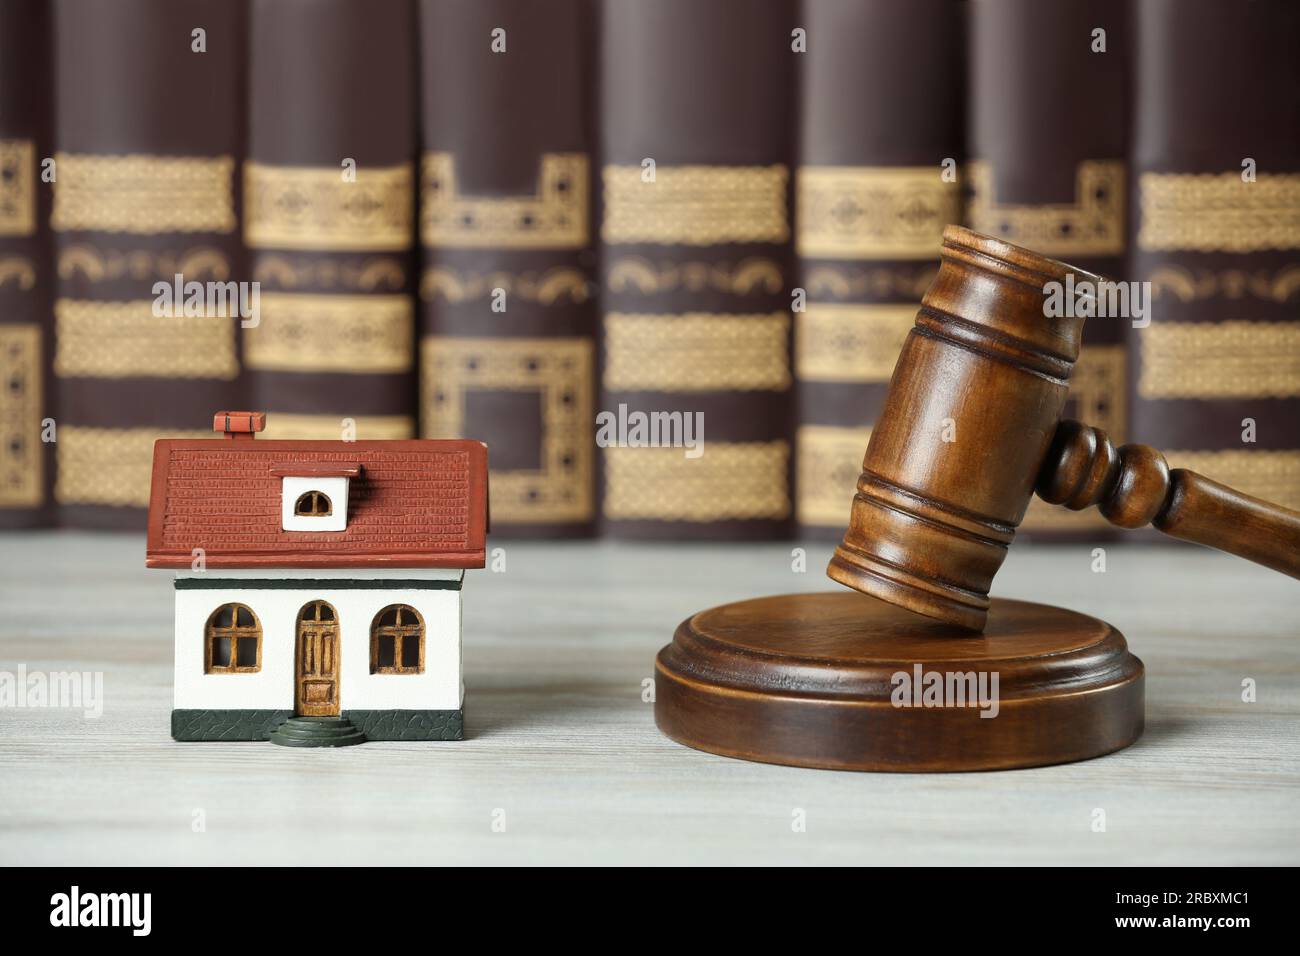 Construction and land law concepts. Judge gavel, house model with books on wooden table Stock Photo